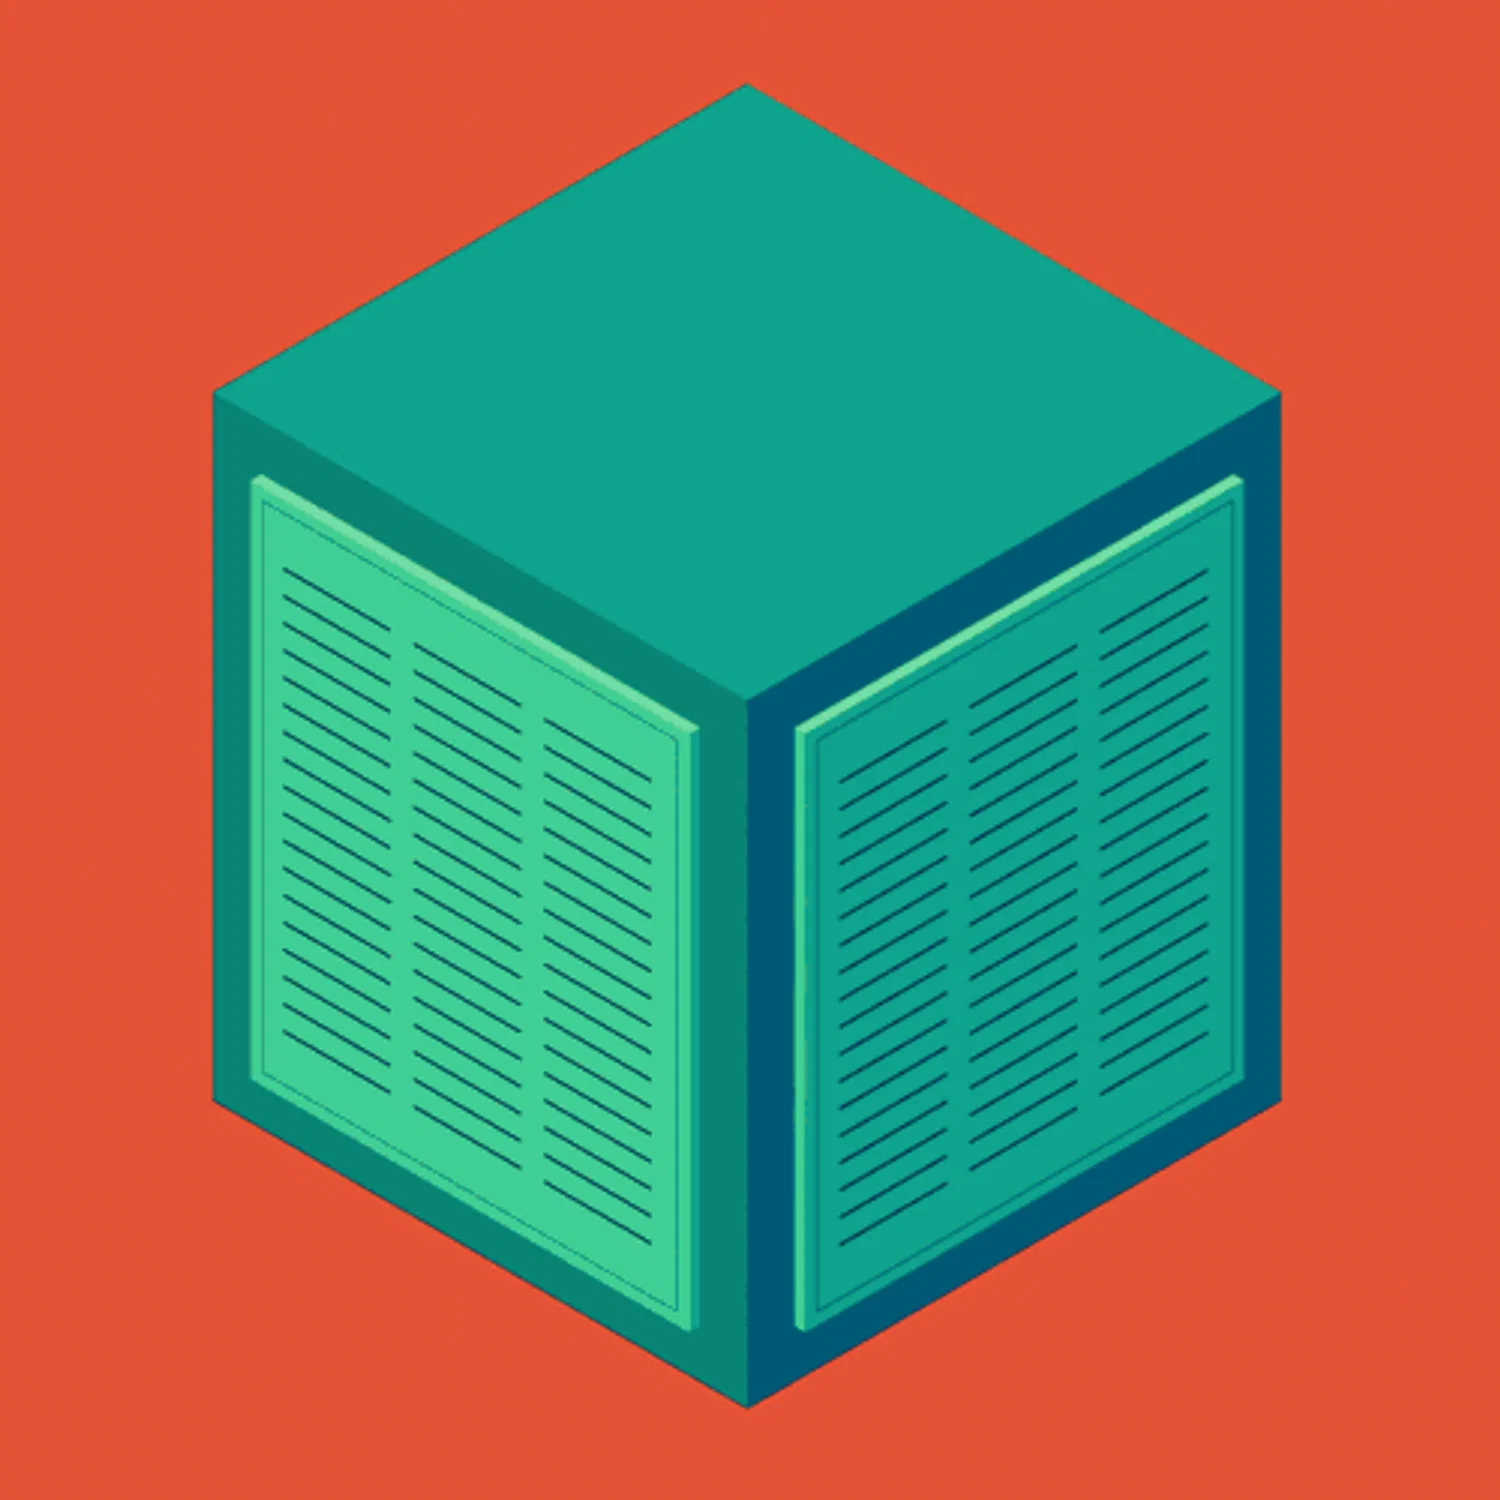 An animated diagram of a swamp cooler, in an isometric lineless style and rendered in shades of orange and teal. 